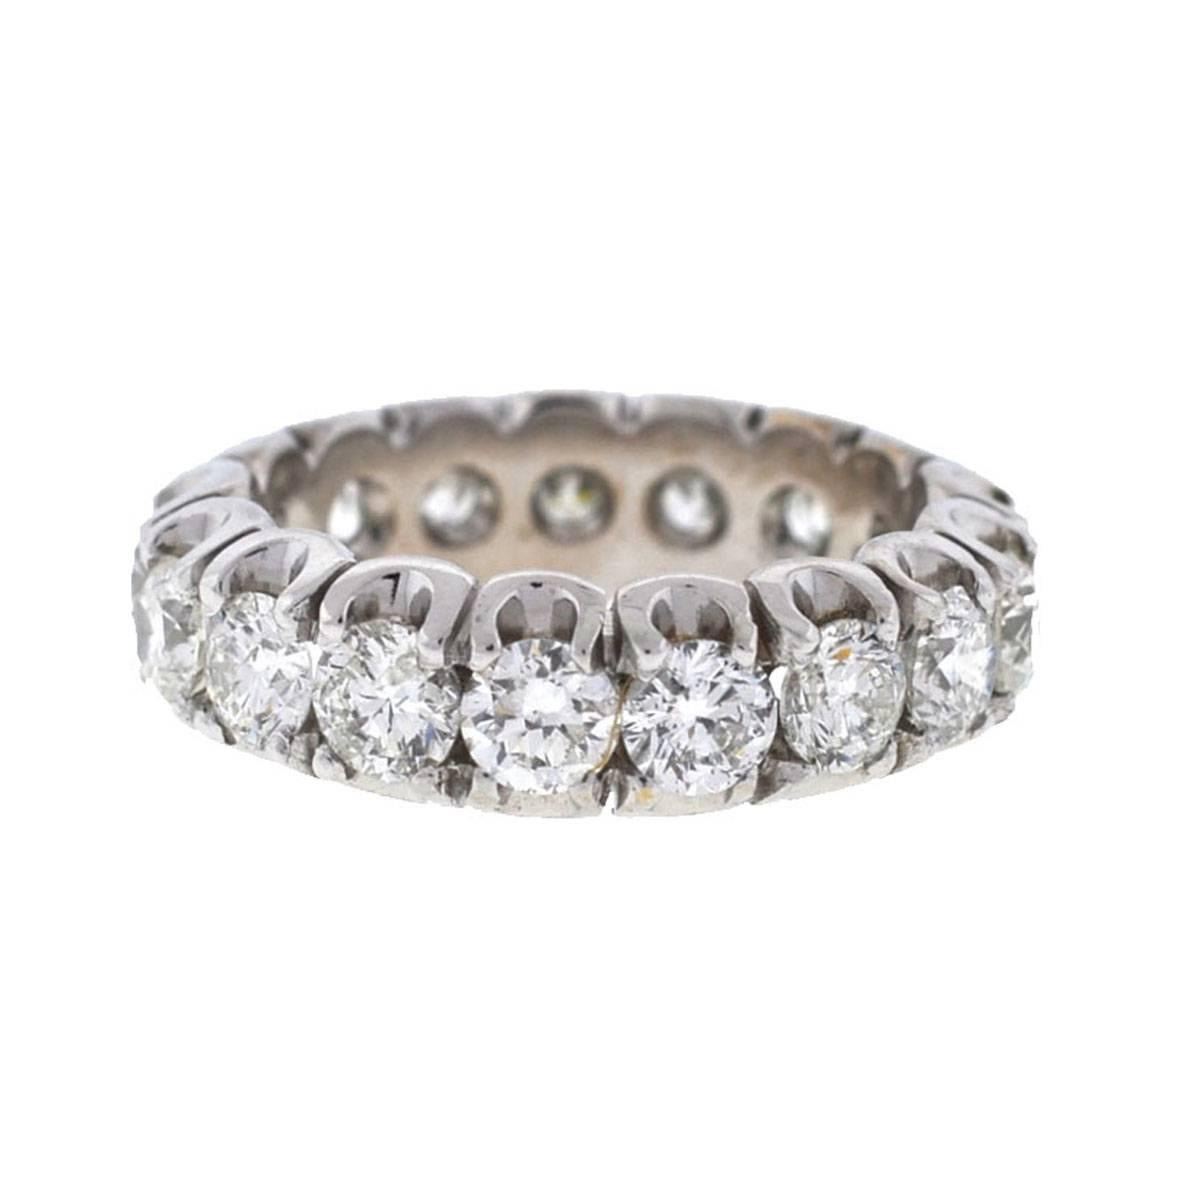 Style - Eternity Band Ring
Metal - 18k White Gold
Size - 5
Weight - 6.5 grams
Stones - Diamonds  - 17 round diamonds total of 2.5cts tw 
Approx. SI/H-I
6168-1tmee